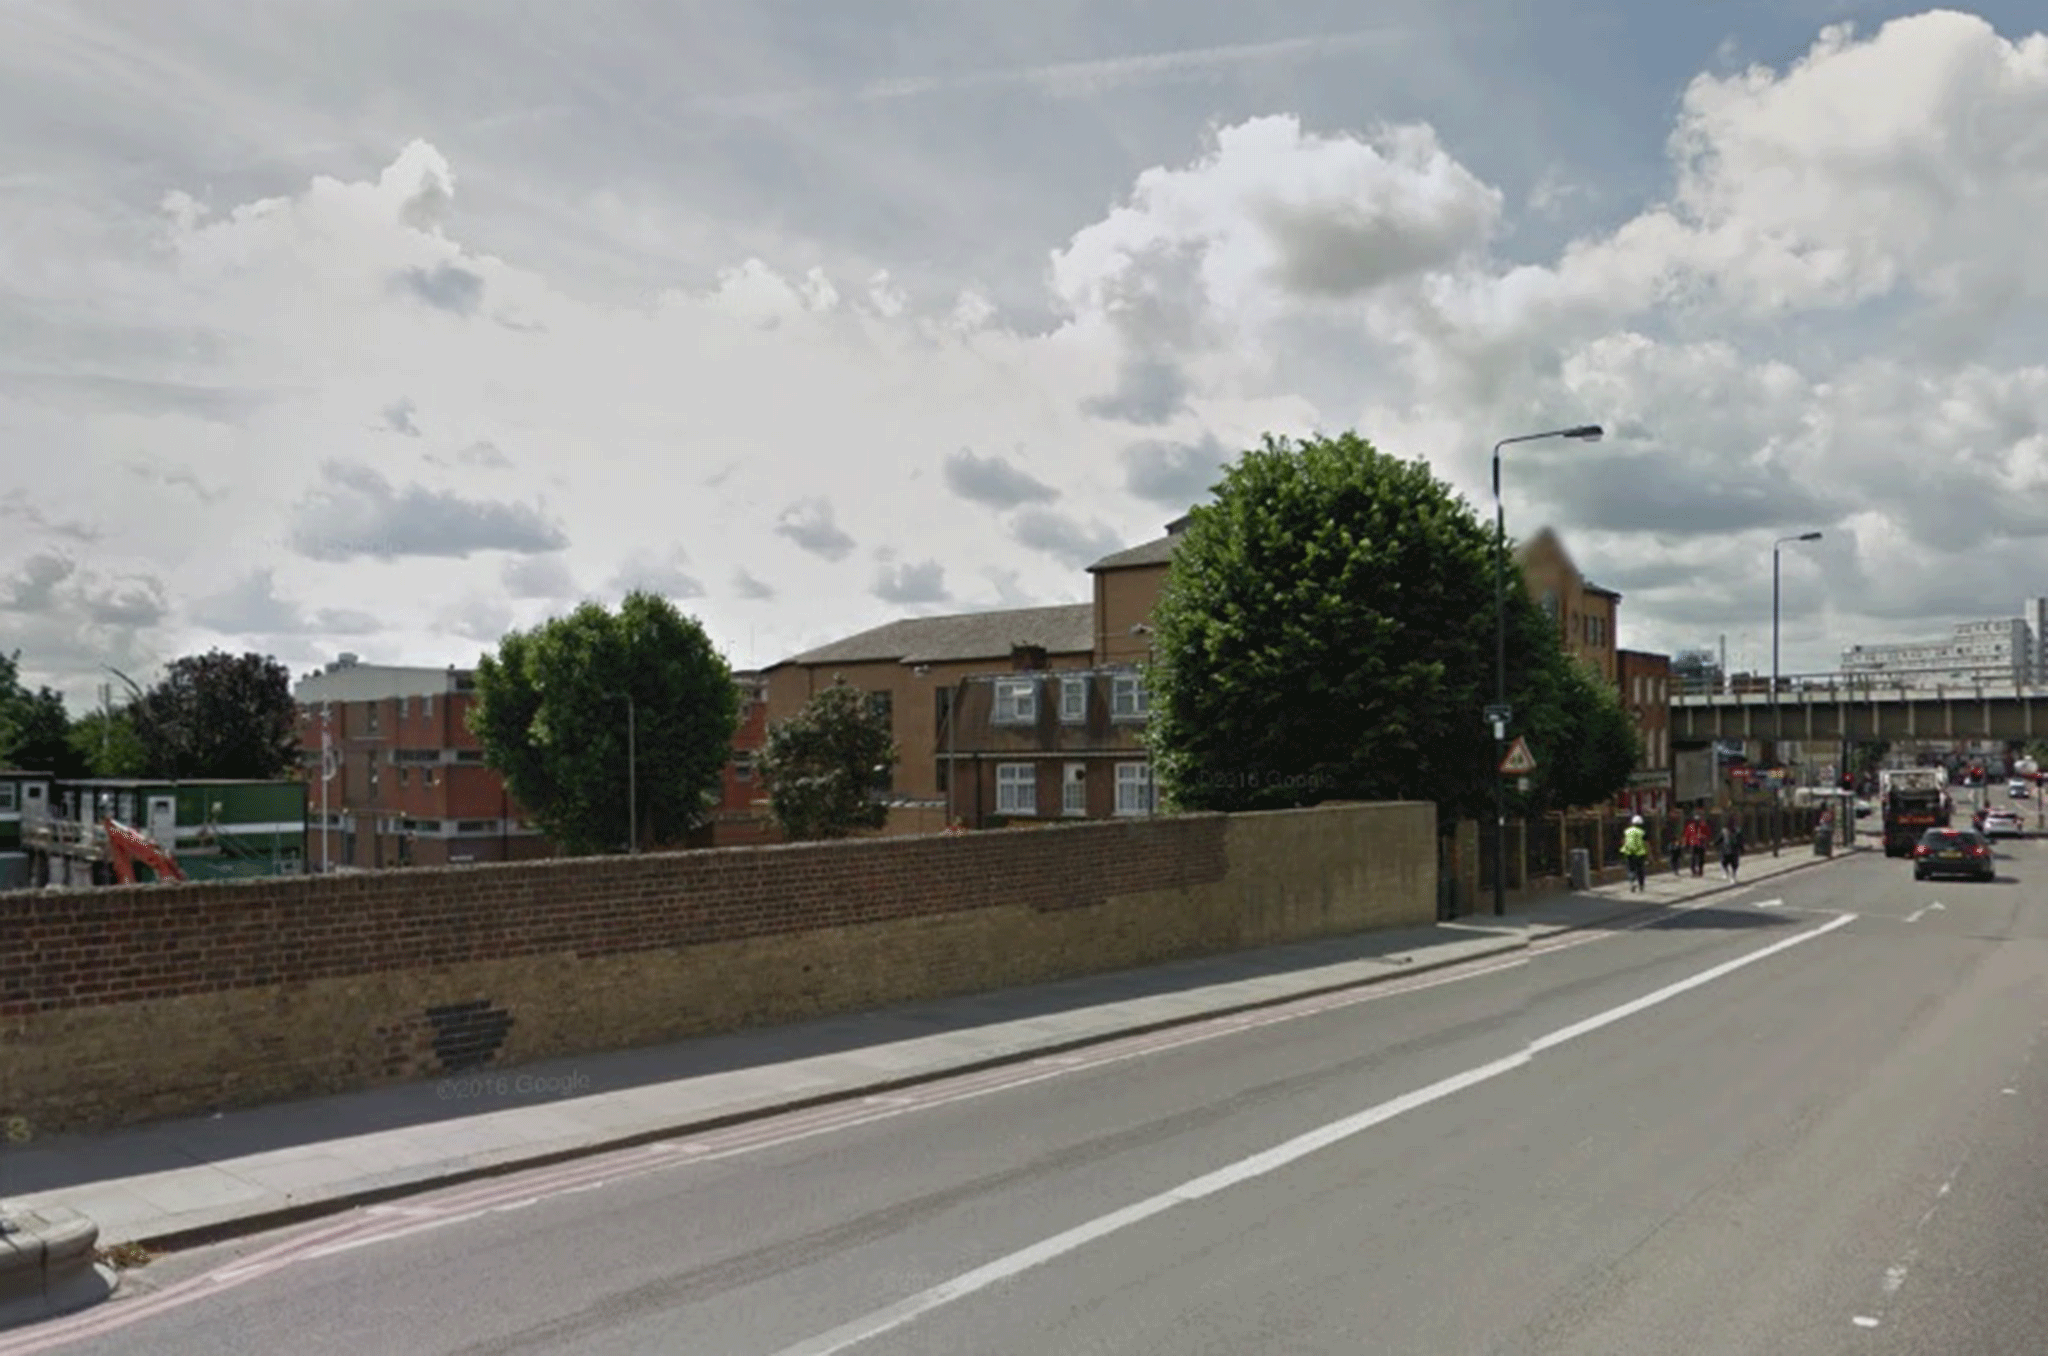 The Ferrari reportedly mounted this area of pavement on a bridge in Battersea Park Road